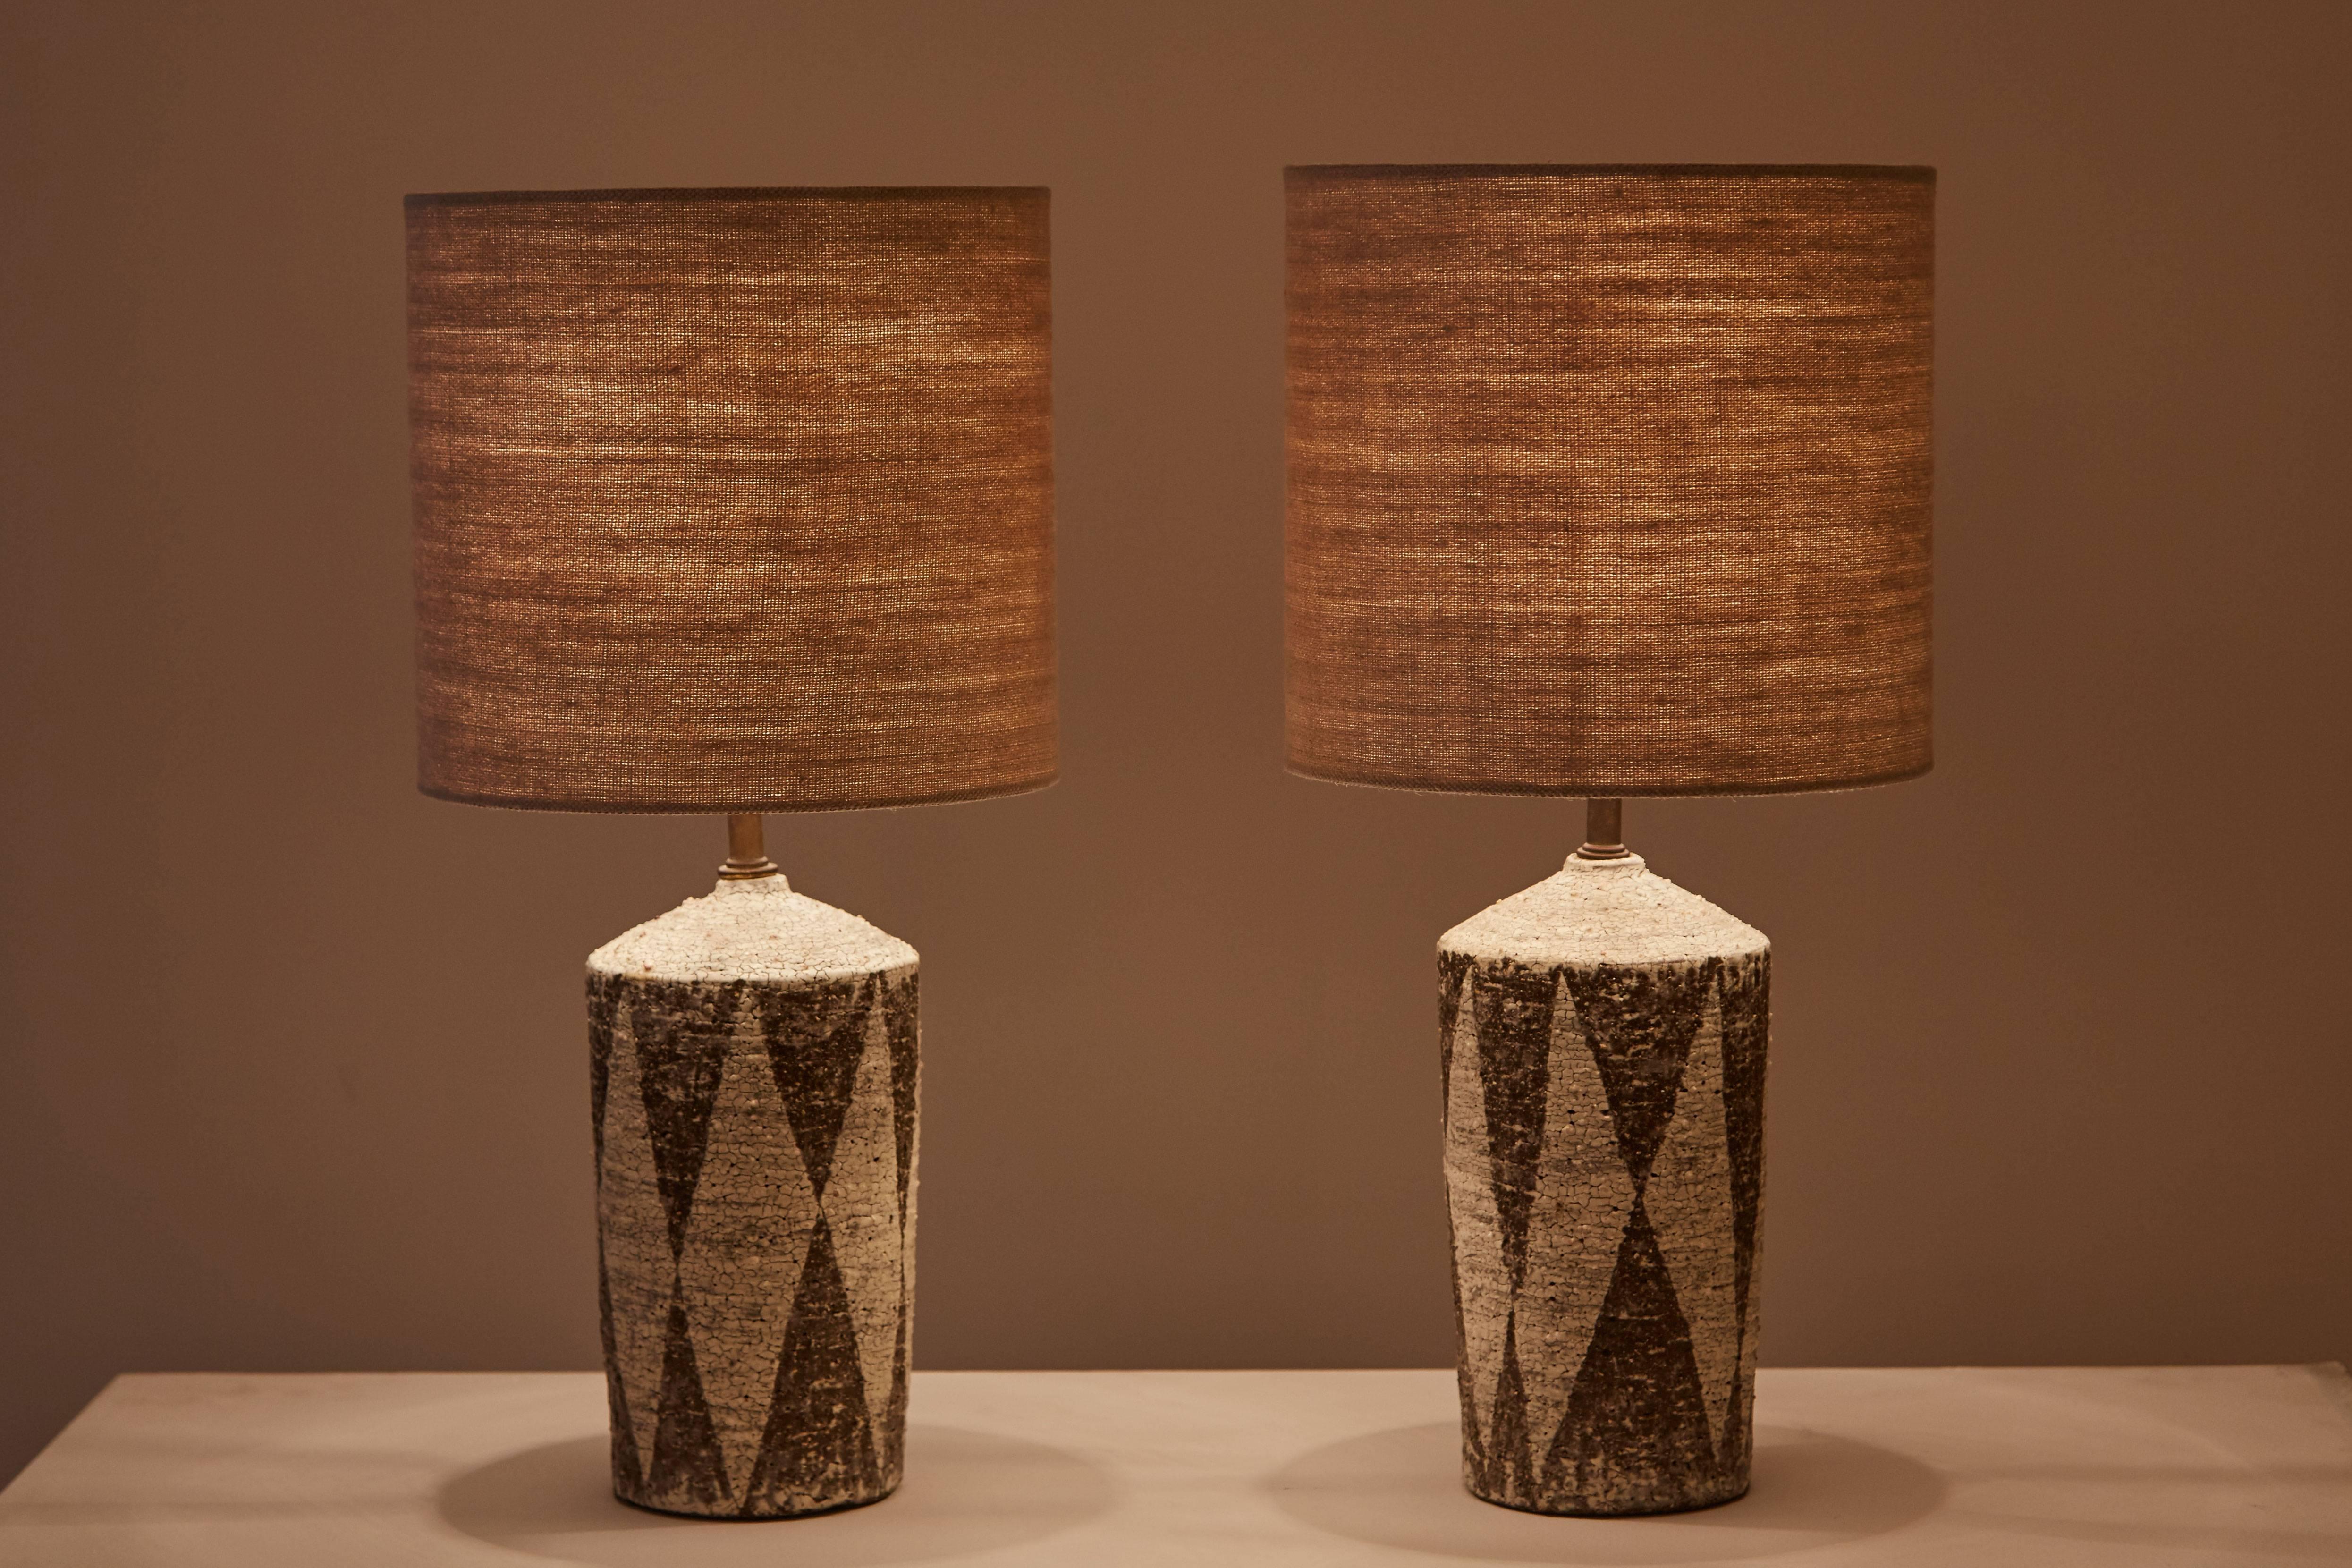 Pair of studio ceramic table lamps, hand glazed with custom linen shades. Made in the USA and signed on the bottom by artist. Original cord. Each lamp takes an E26 75w maximum bulb.